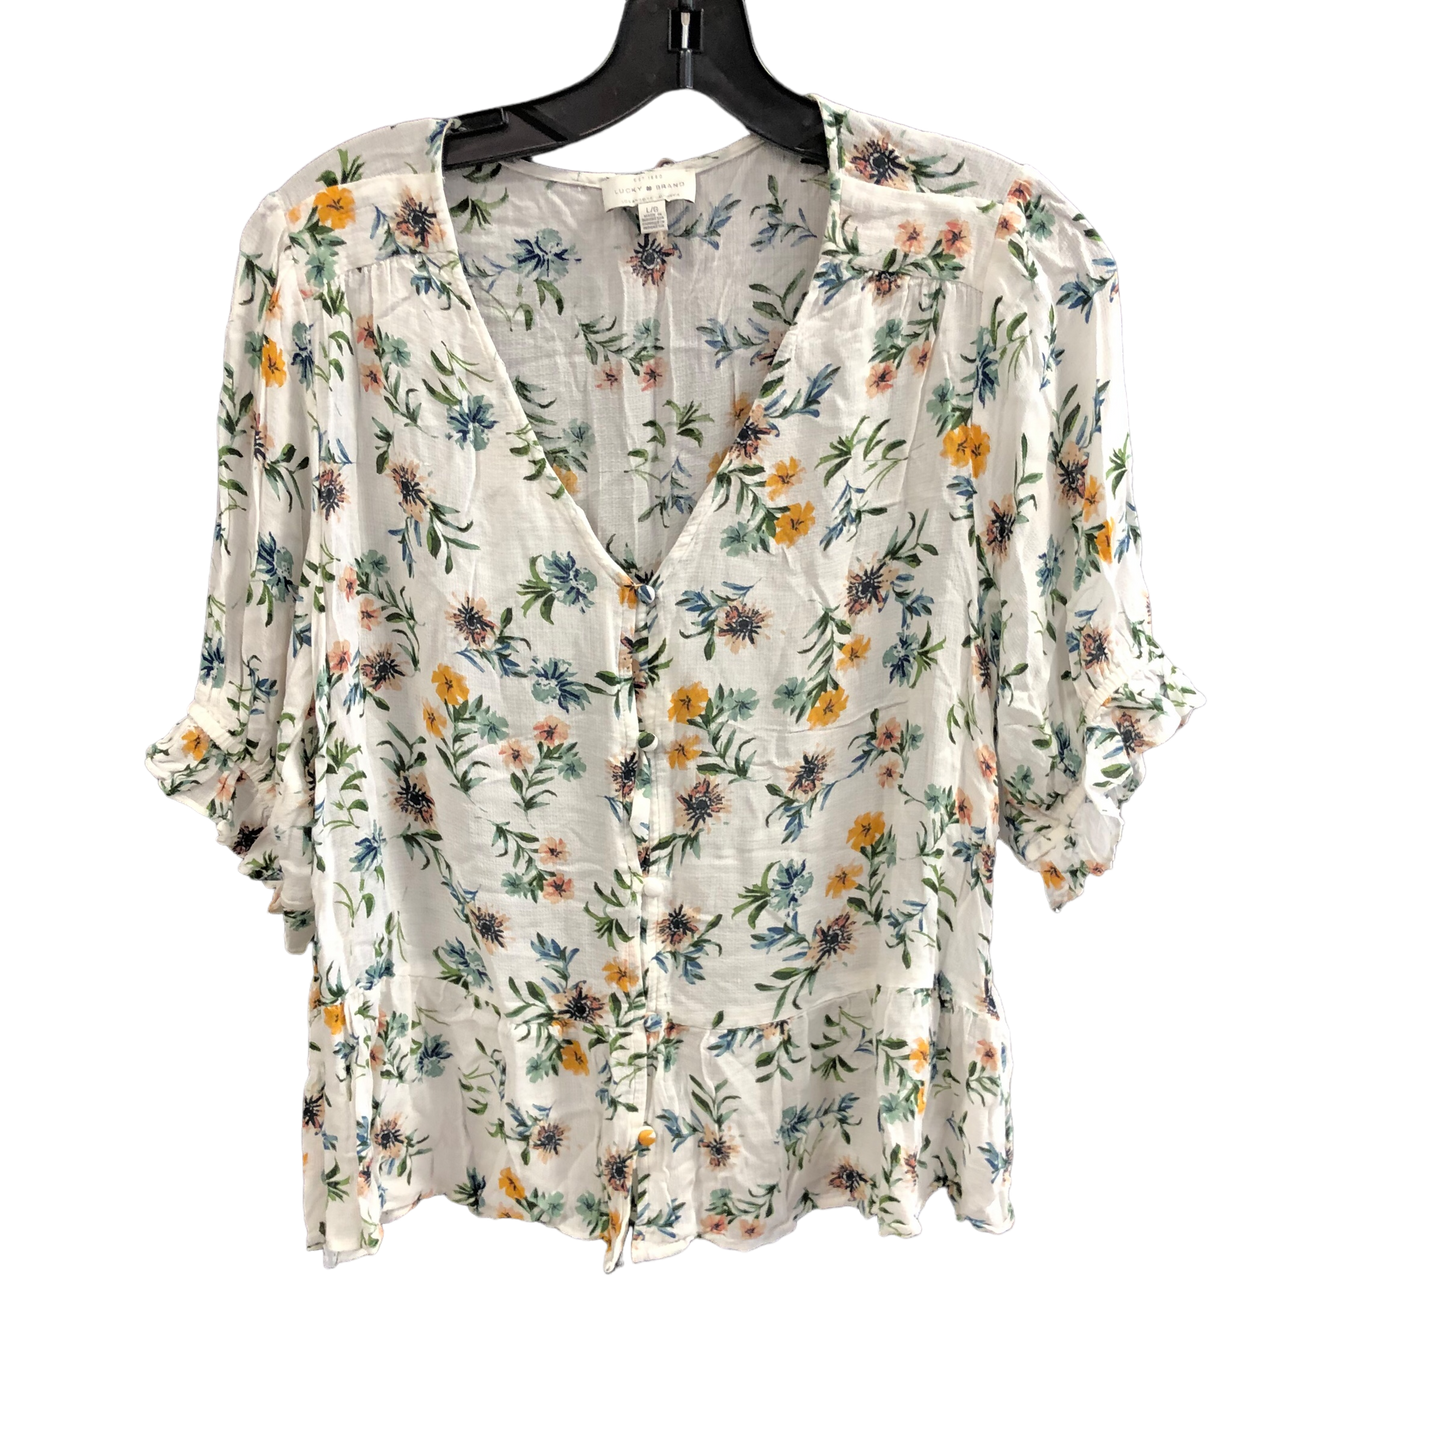 Floral Print Top Short Sleeve Lucky Brand, Size L